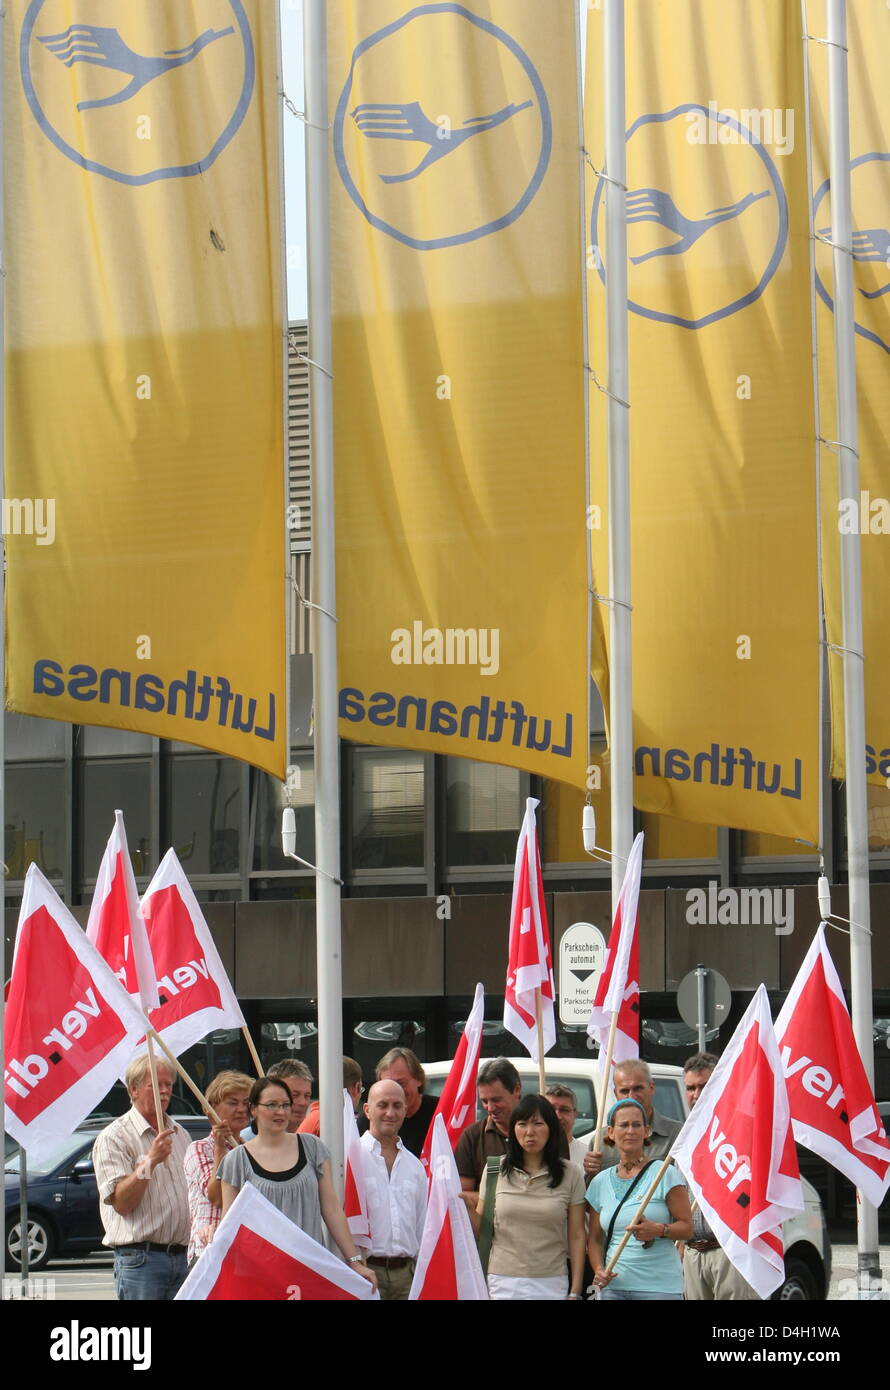 Employees of Lufthansa are on strike in Hanover, Germany, 30 July 2008. The labour dispute is set to continue open-ended as service union 'ver.di' demands a pay-rise of 9.8 per cent over one year for their 50,000 members employed at Lufthansa. The German carrier offers 7.7 per cent over 21 months to date and proposed to solve the action in an arbitration. Photo: Holger Hollemann Stock Photo